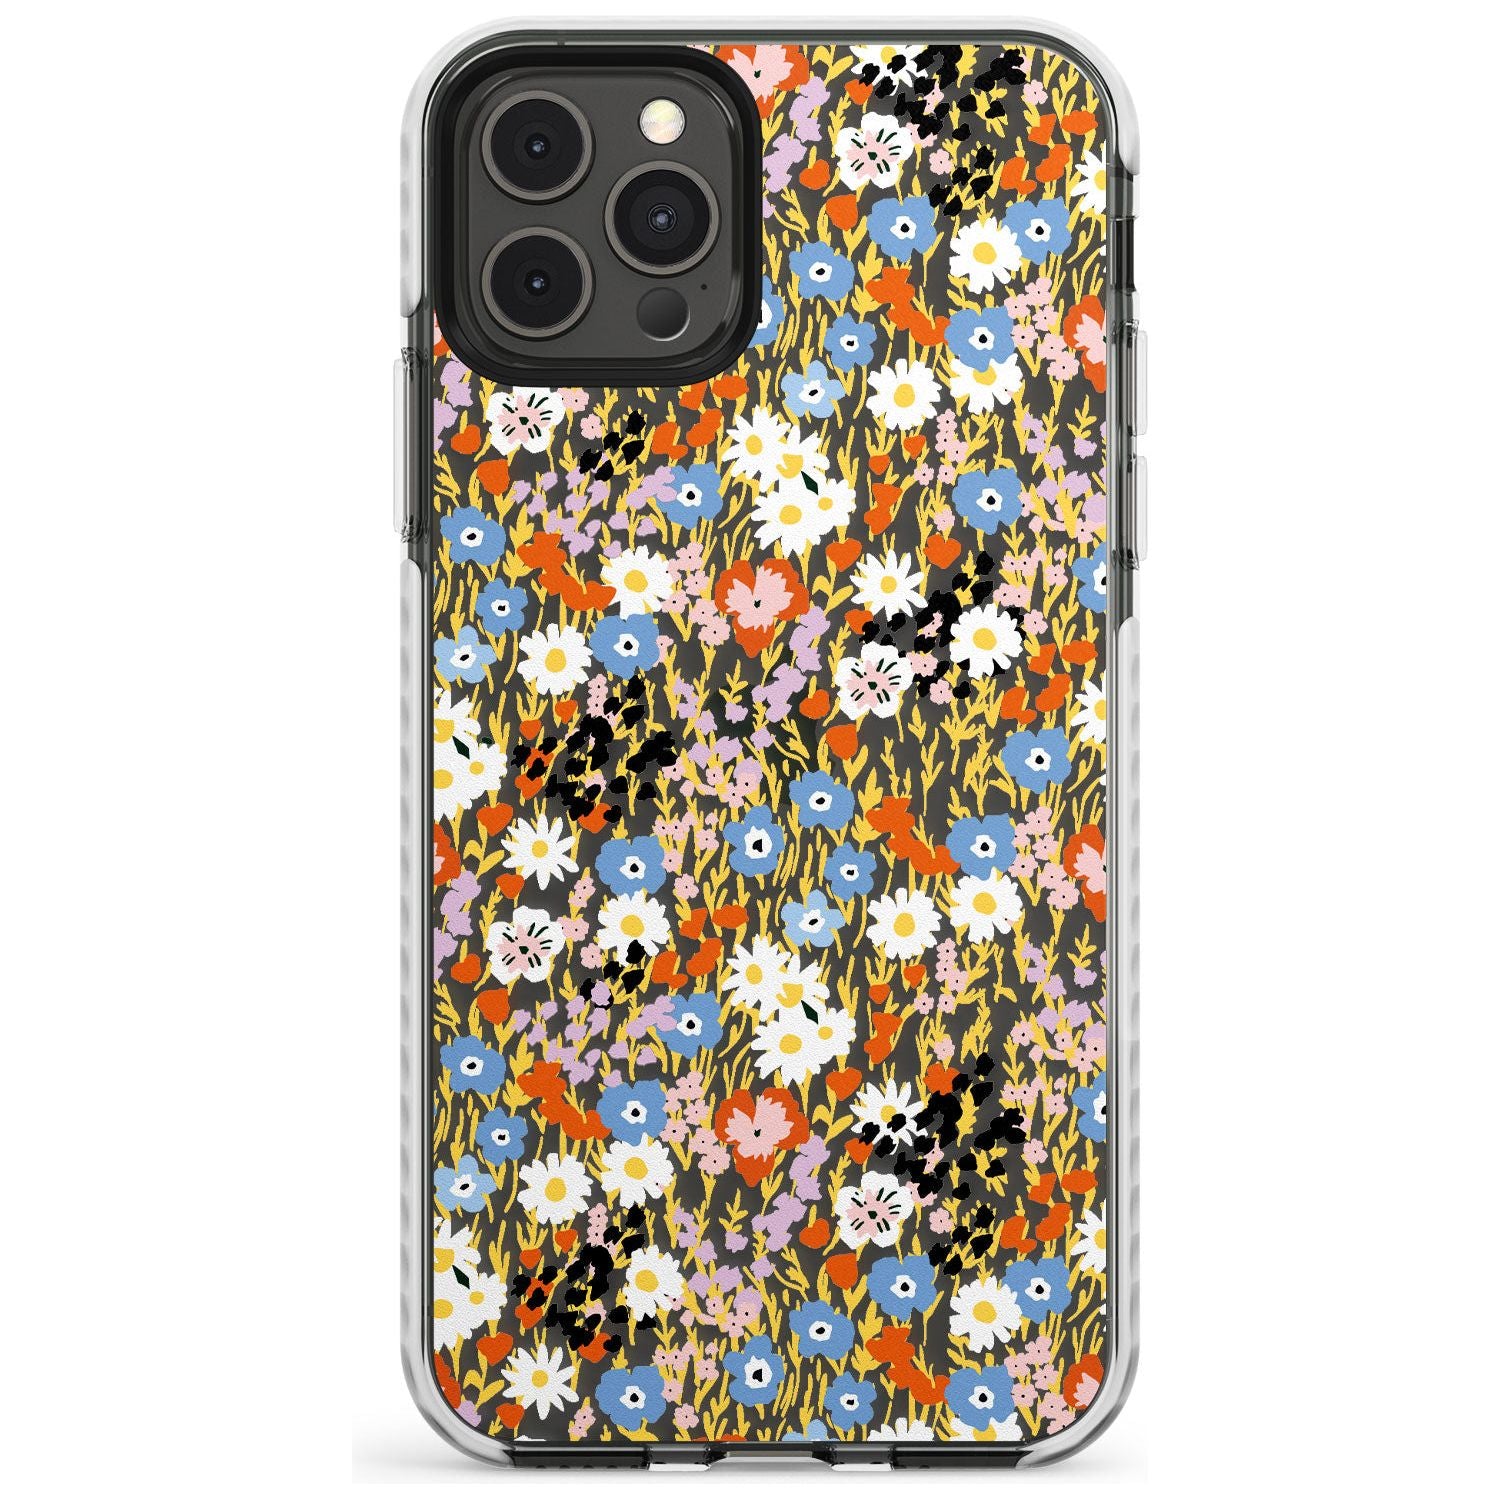 Busy Floral Mix: Transparent Slim TPU Phone Case for iPhone 11 Pro Max